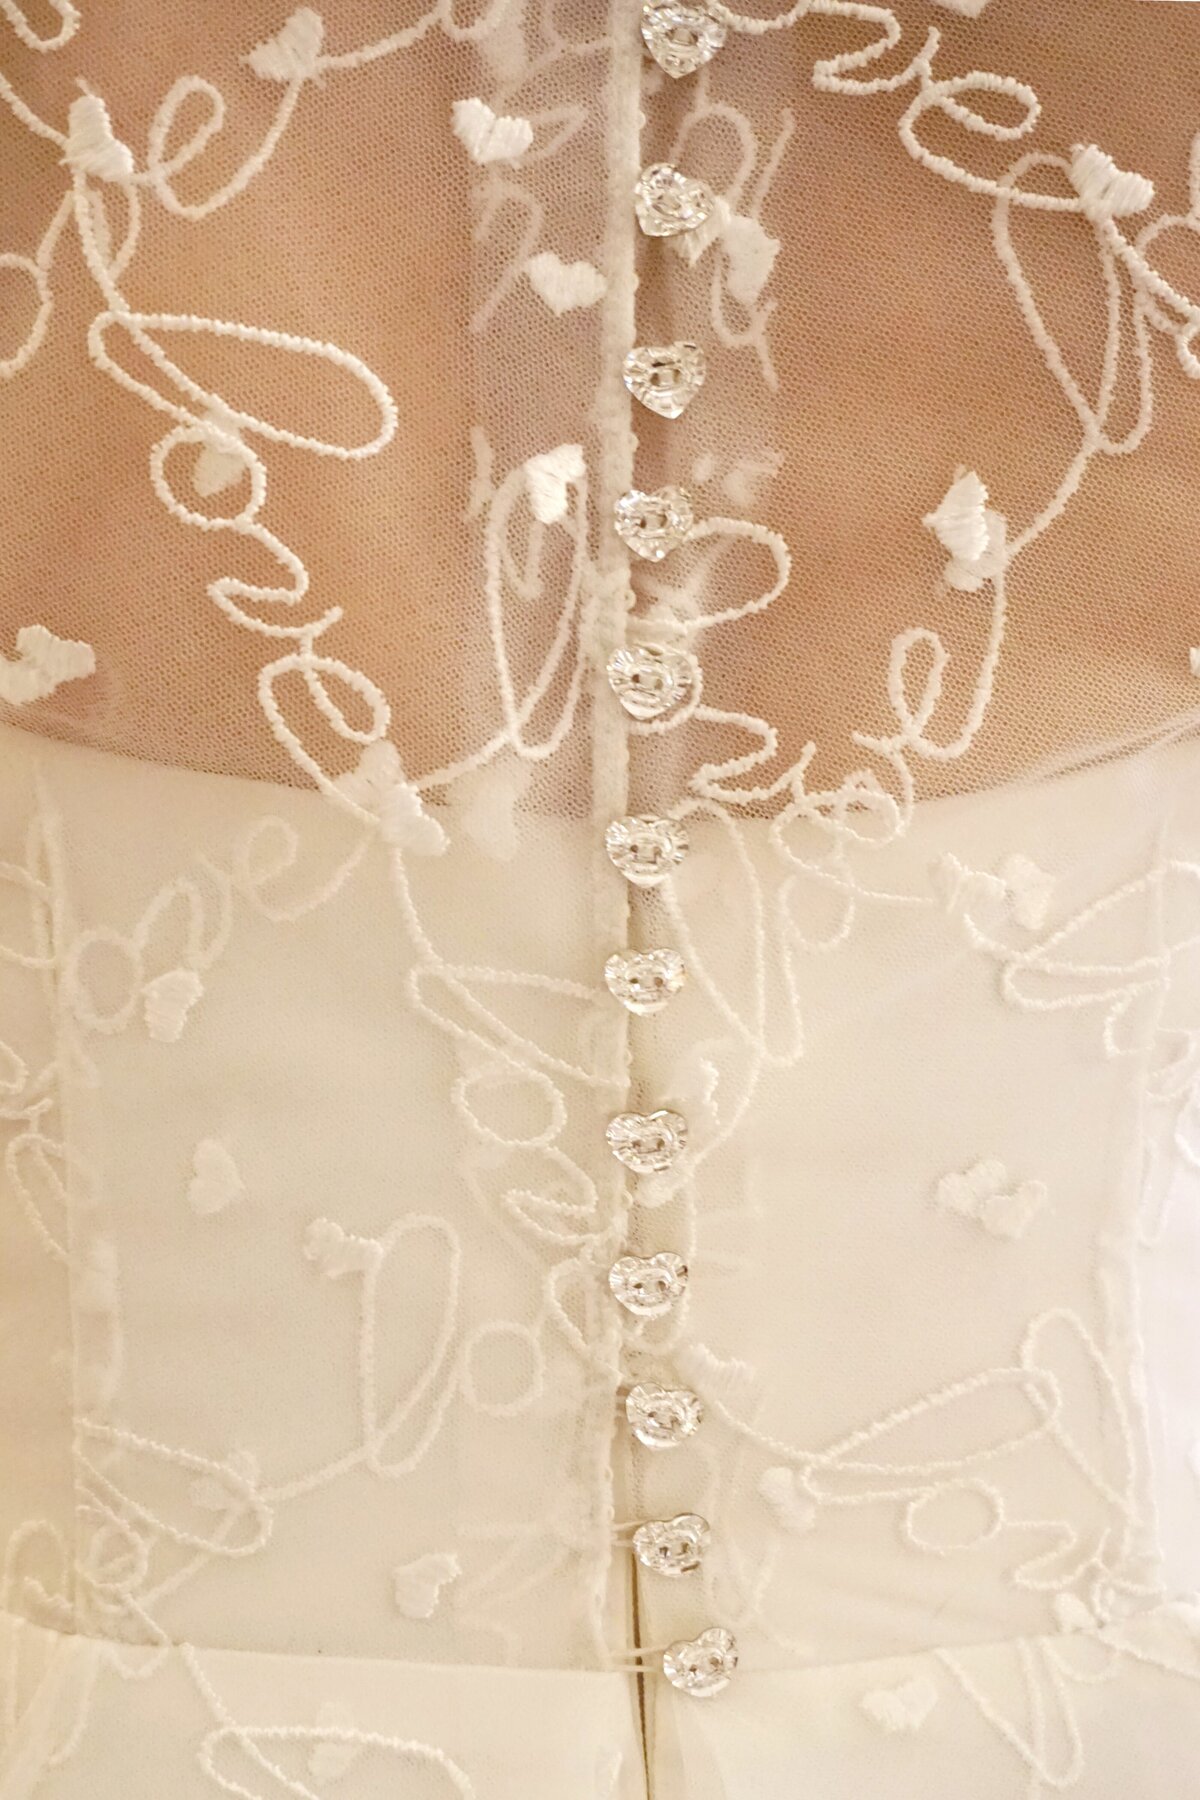 The high back illusion bodice is closed with heart-shaped crystal buttons for a romantic and sparkly touch.